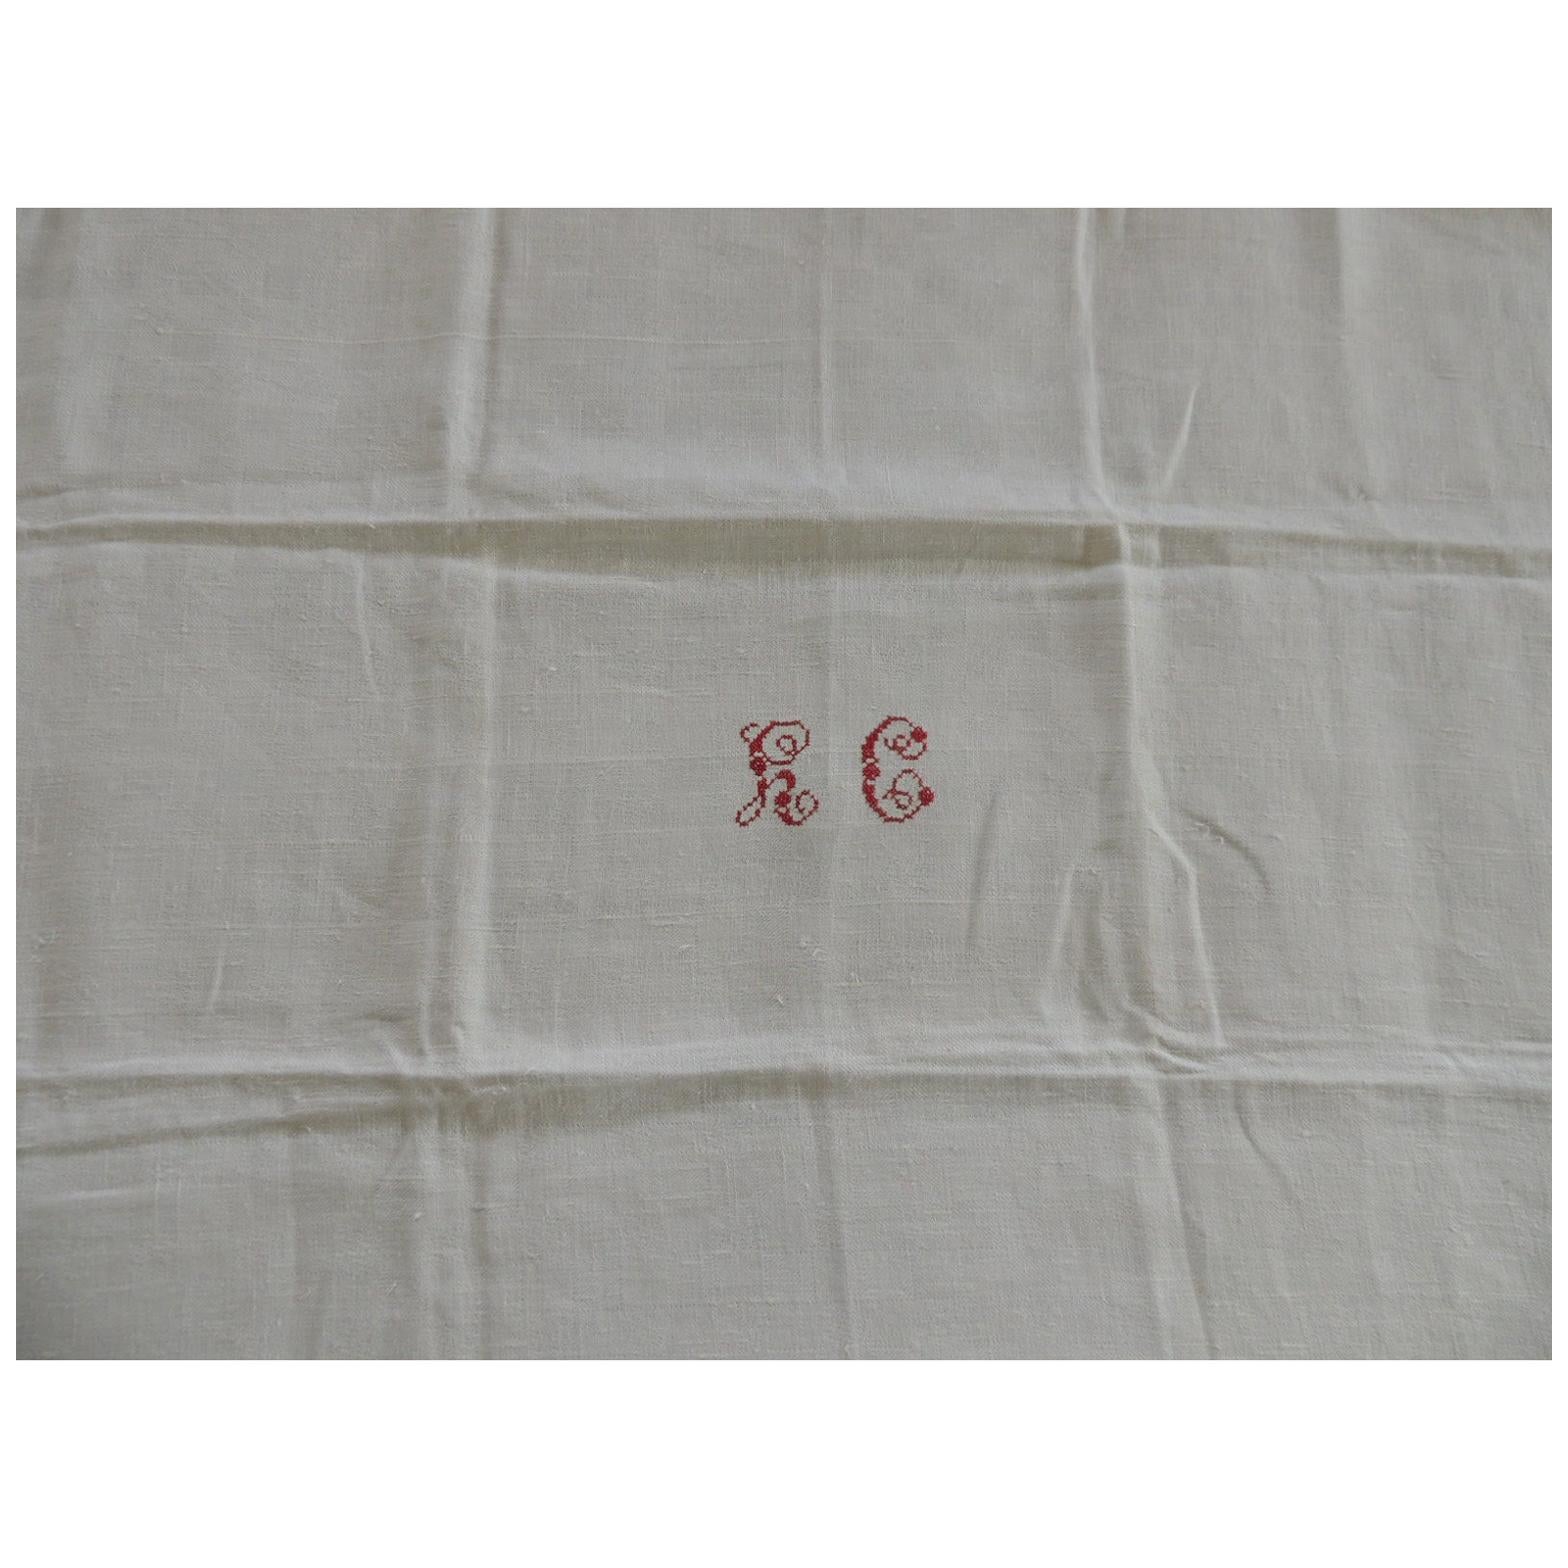 Antique Natural Linen Embroidered Textile with Red Letters "H" & "C"